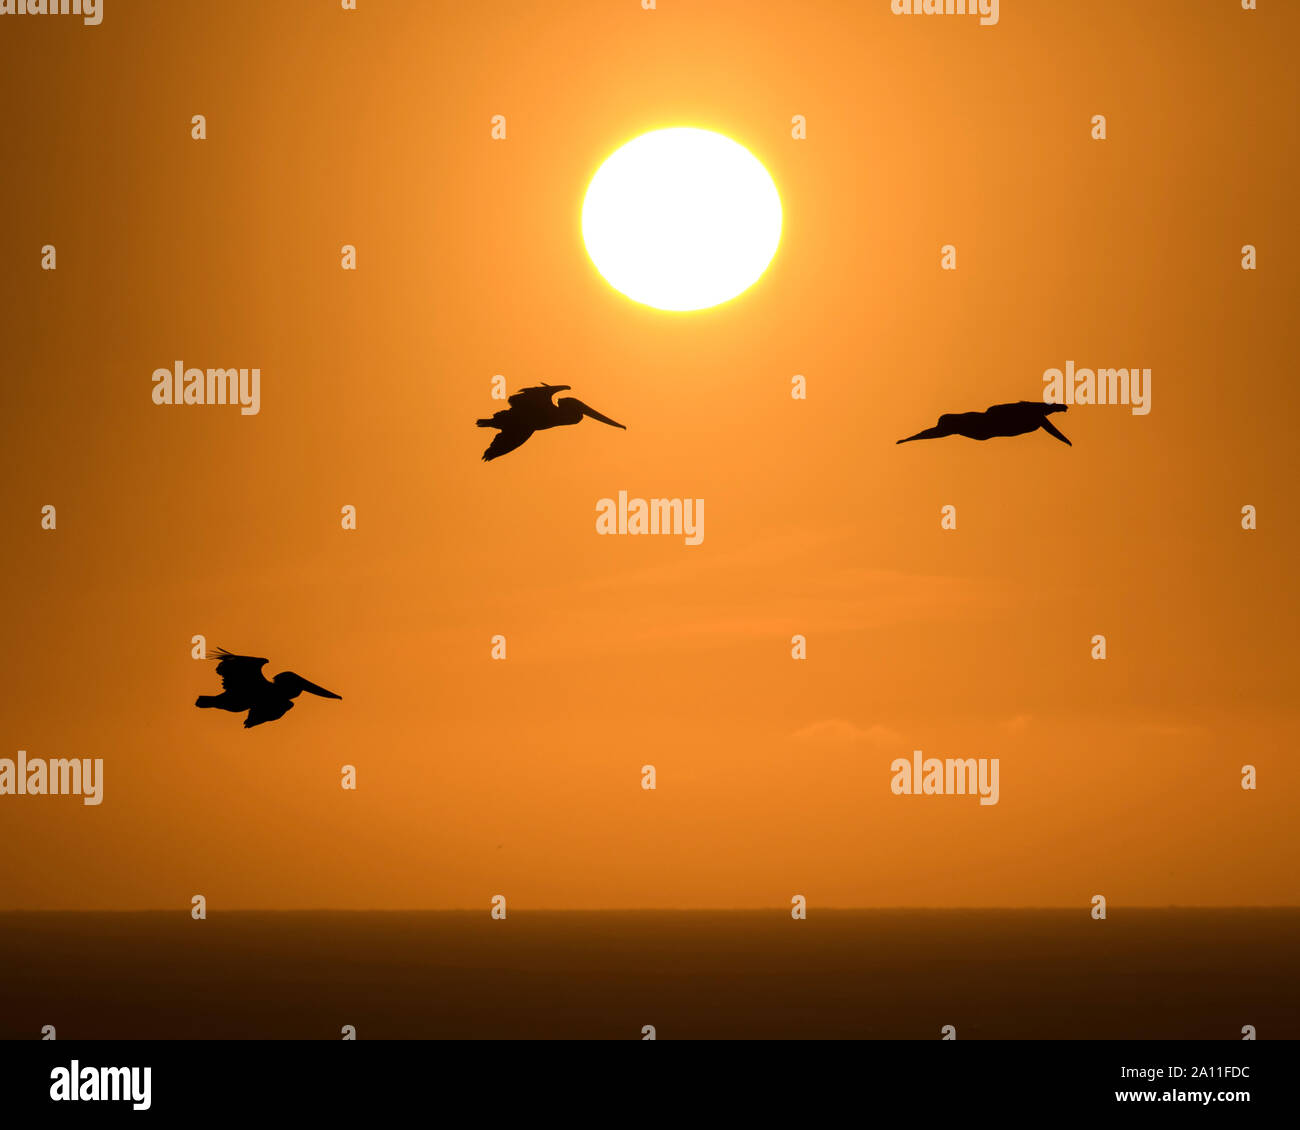 Three Pelican fly in formation over a setting sun Stock Photo